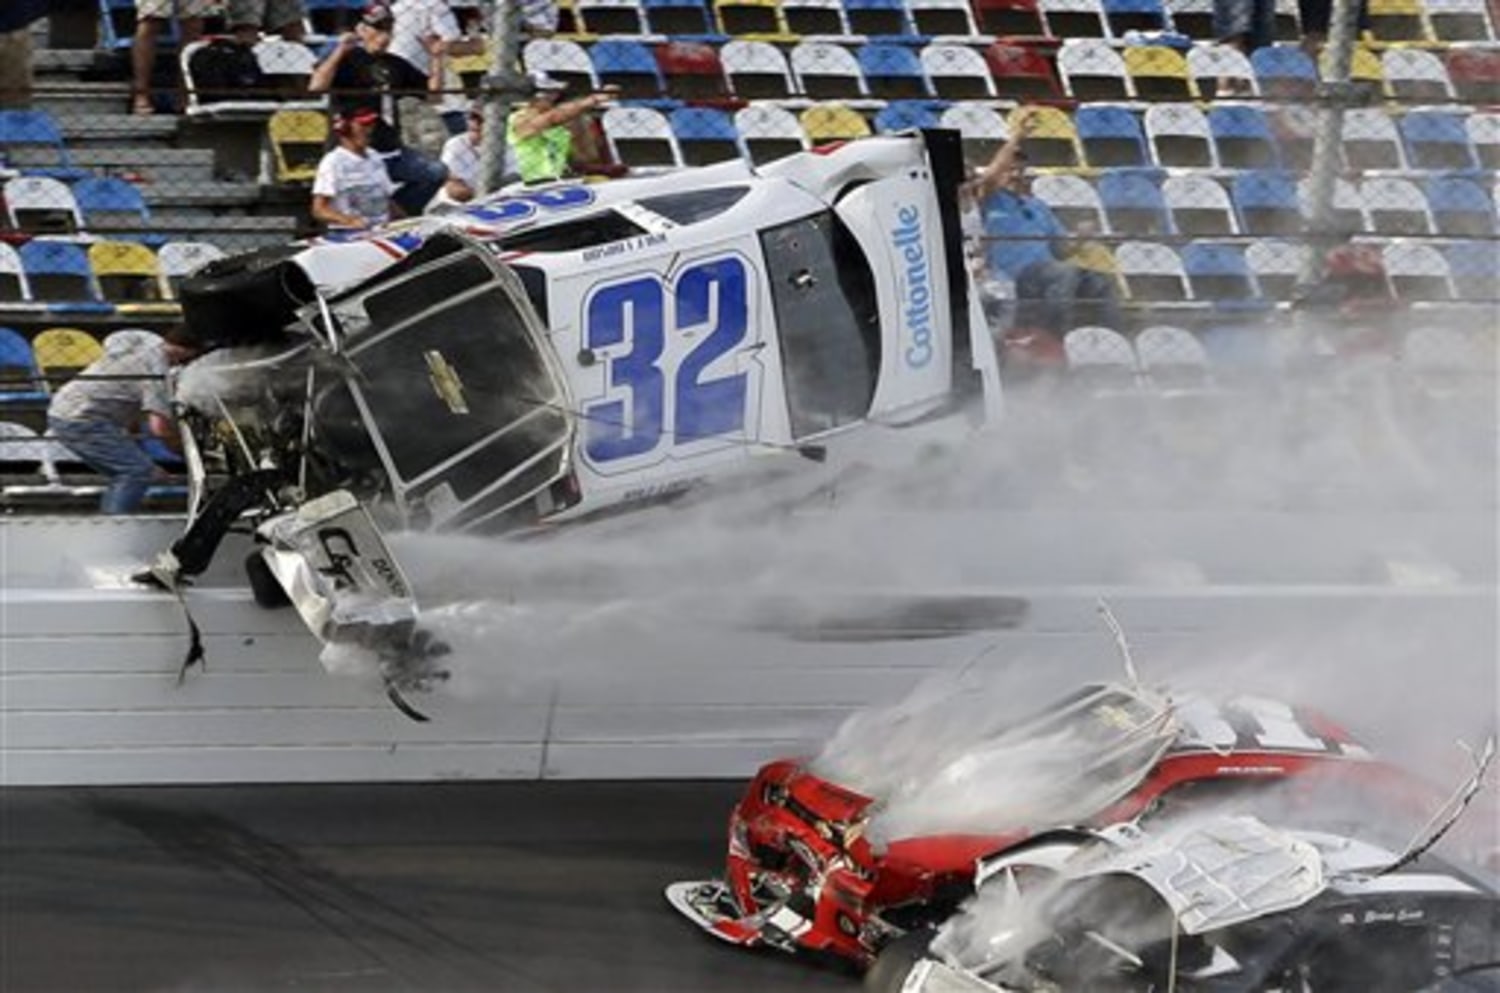 Fans NASCAR accident video returns to YouTube after takedown